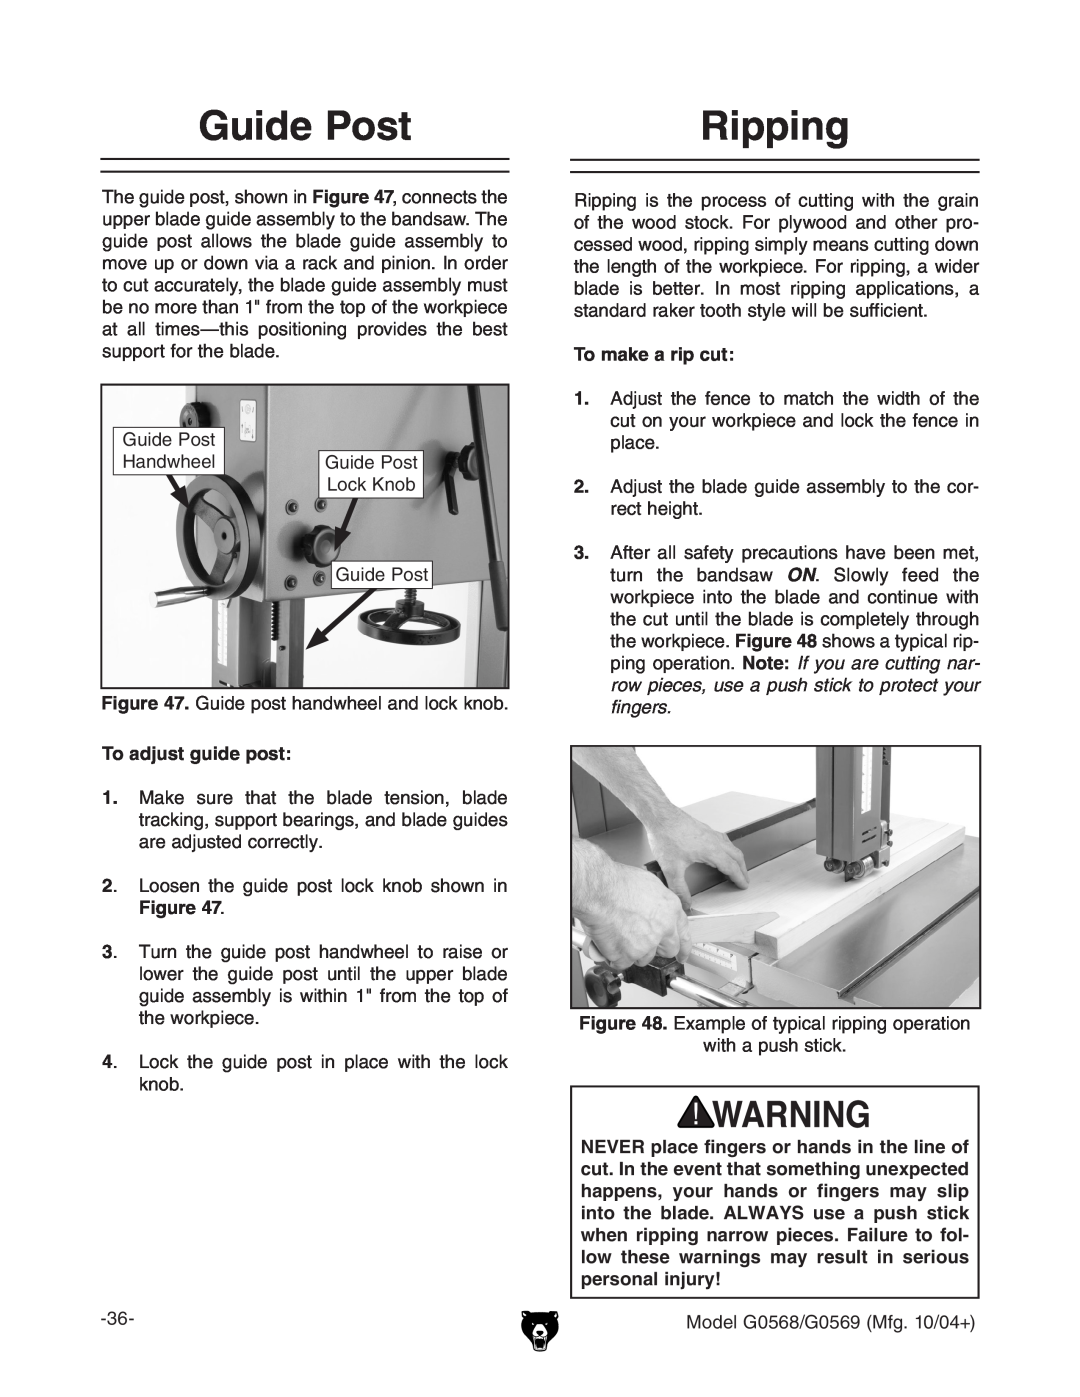 Grizzly G0569, G0568 owner manual Guide Post, Ripping, jYZEdhi .jYZedhiVcYlZZaVcYadX``cdW#, To adjust guide post 